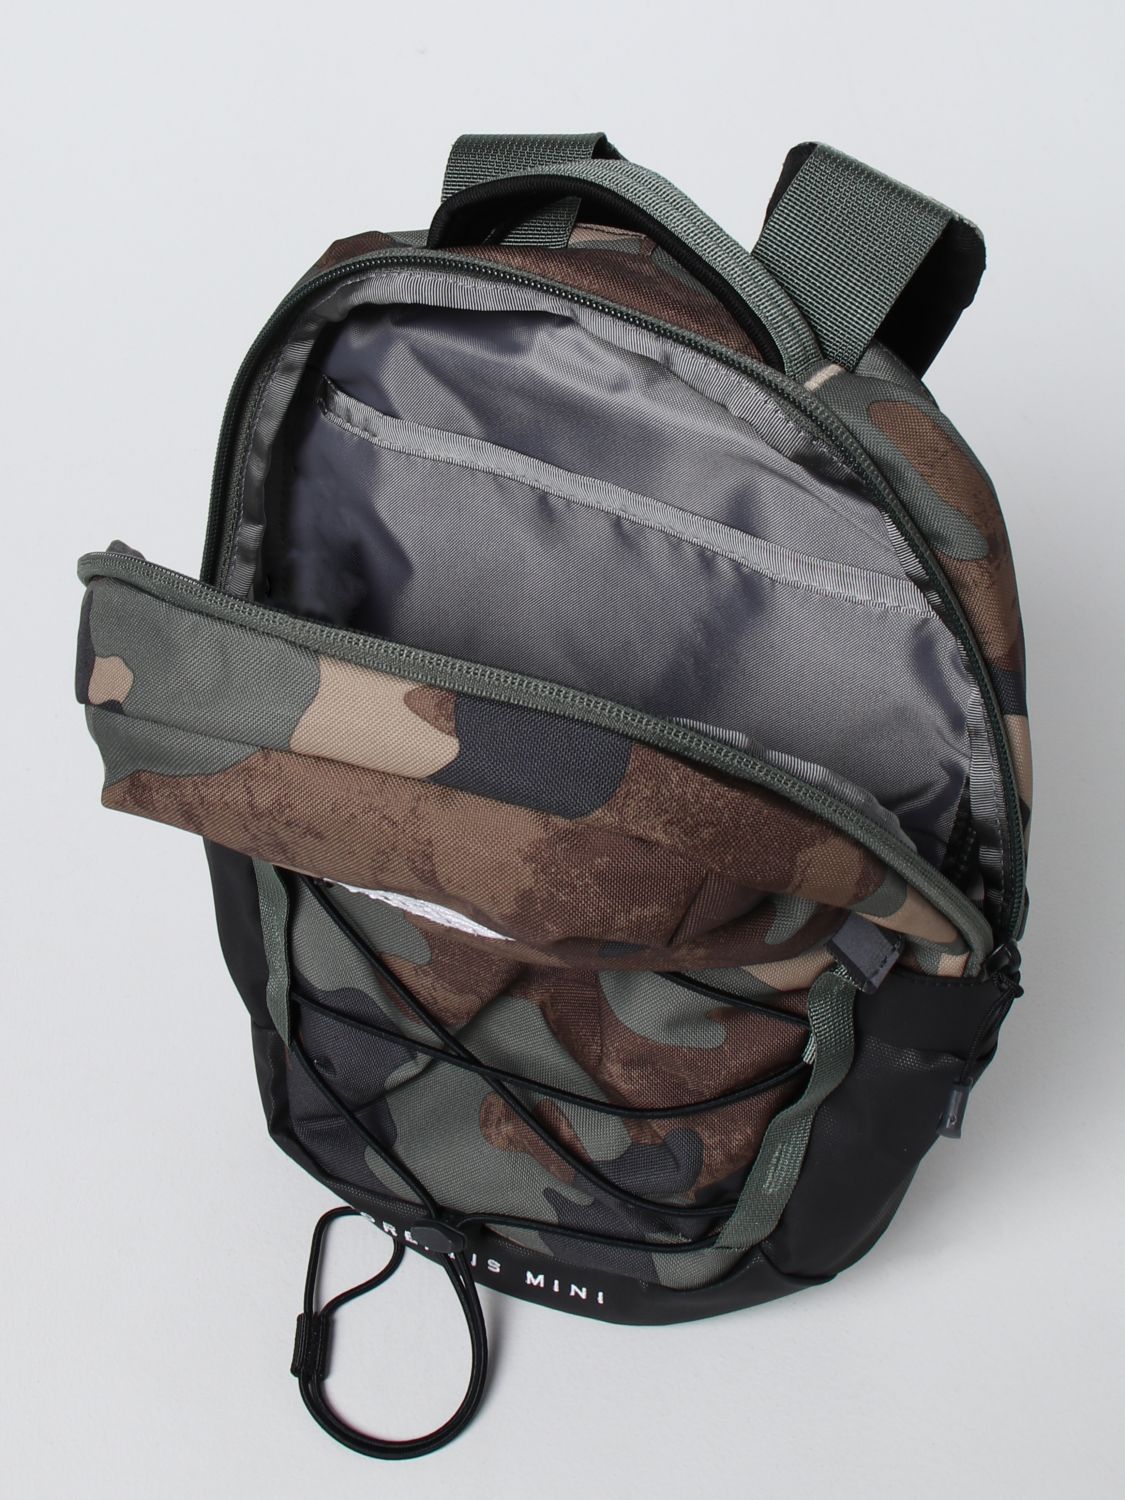 Backpack The North Face: The North Face mini Borealis backpack with logo military 4